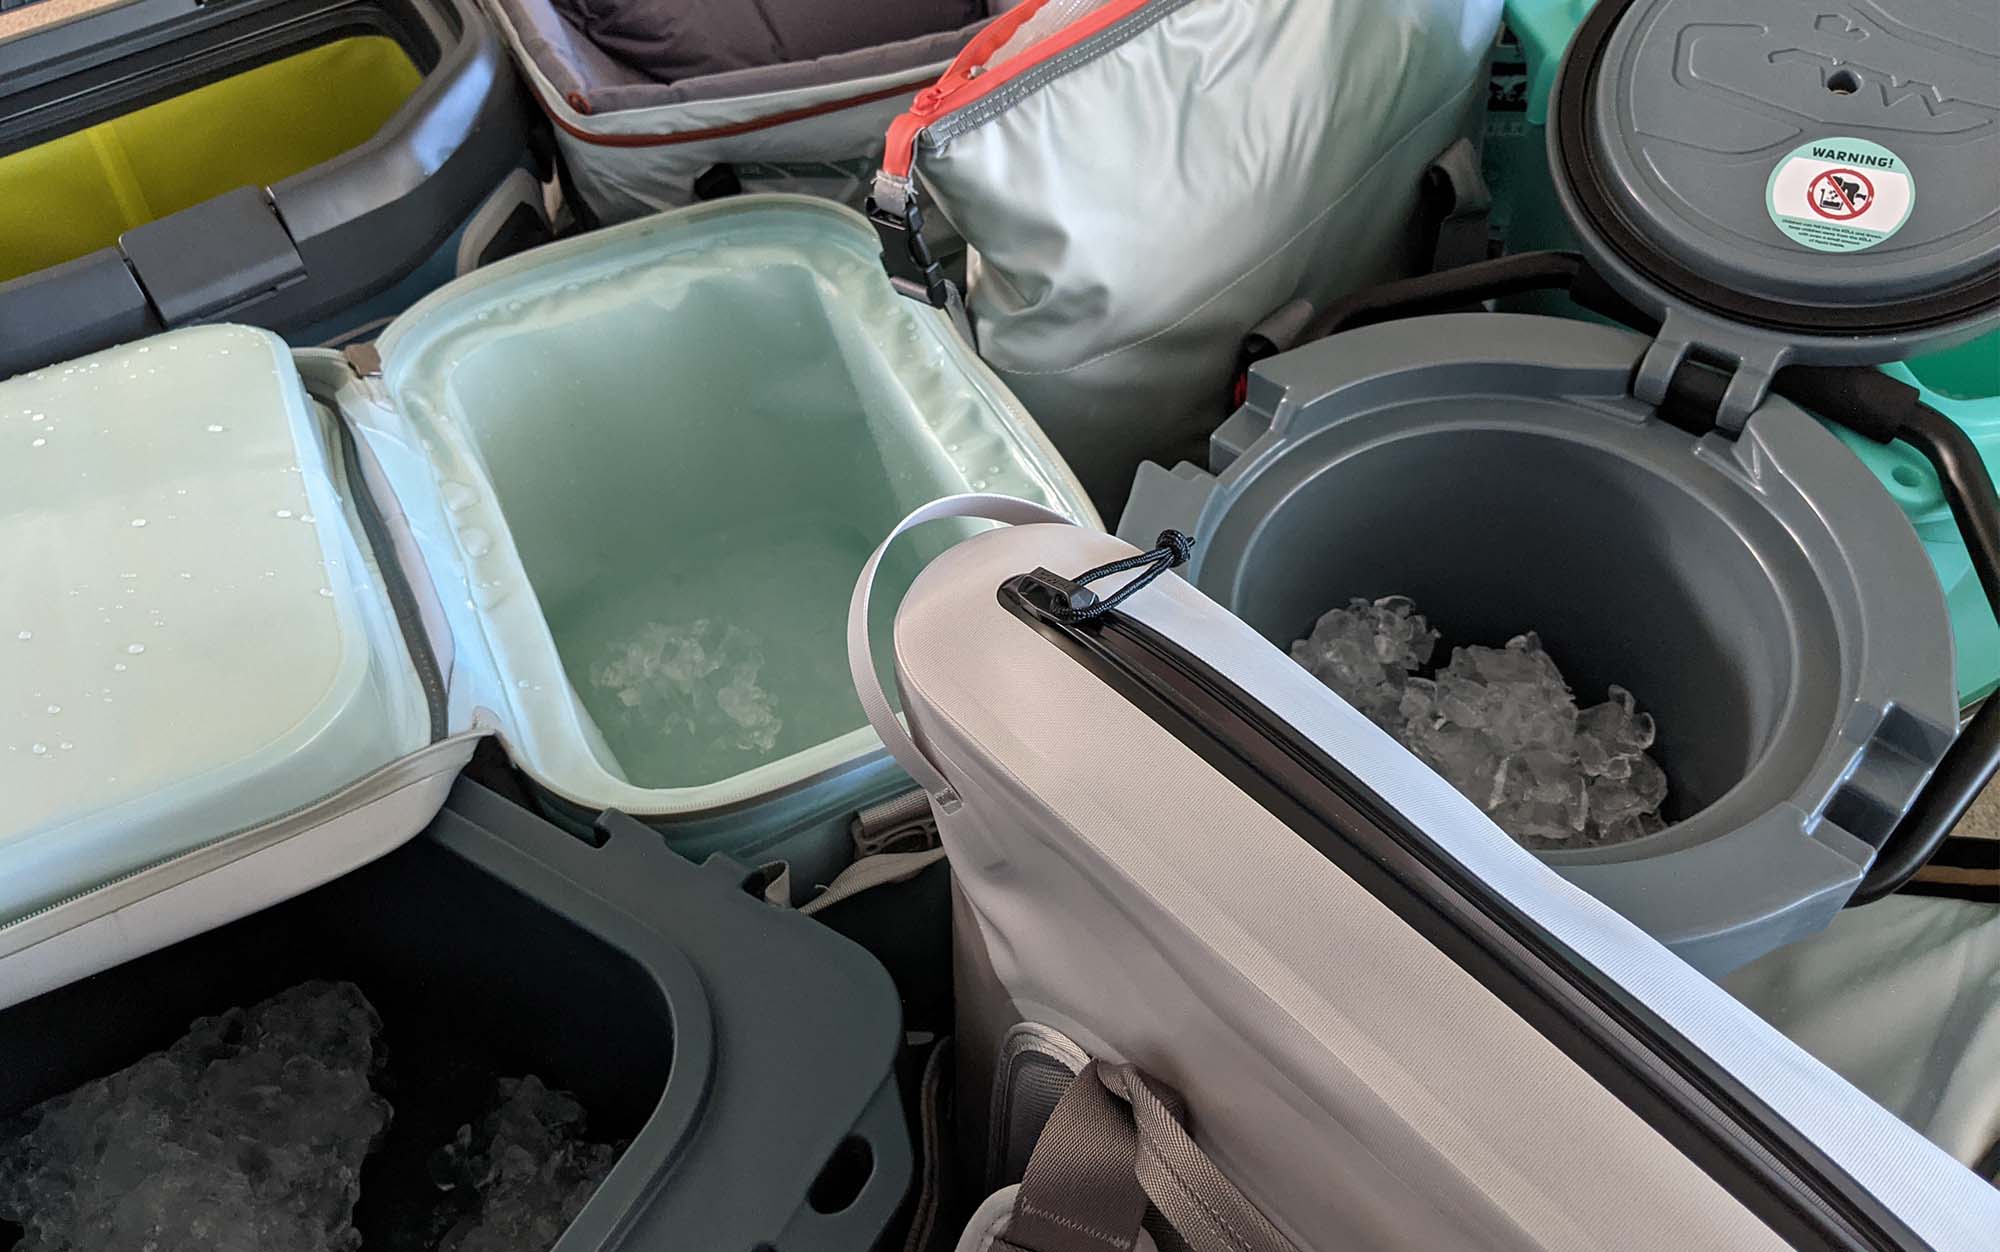 Day two of the ice retention test revealed some important performance distinctions between the soft-sided coolers and the hard-sided coolers. 